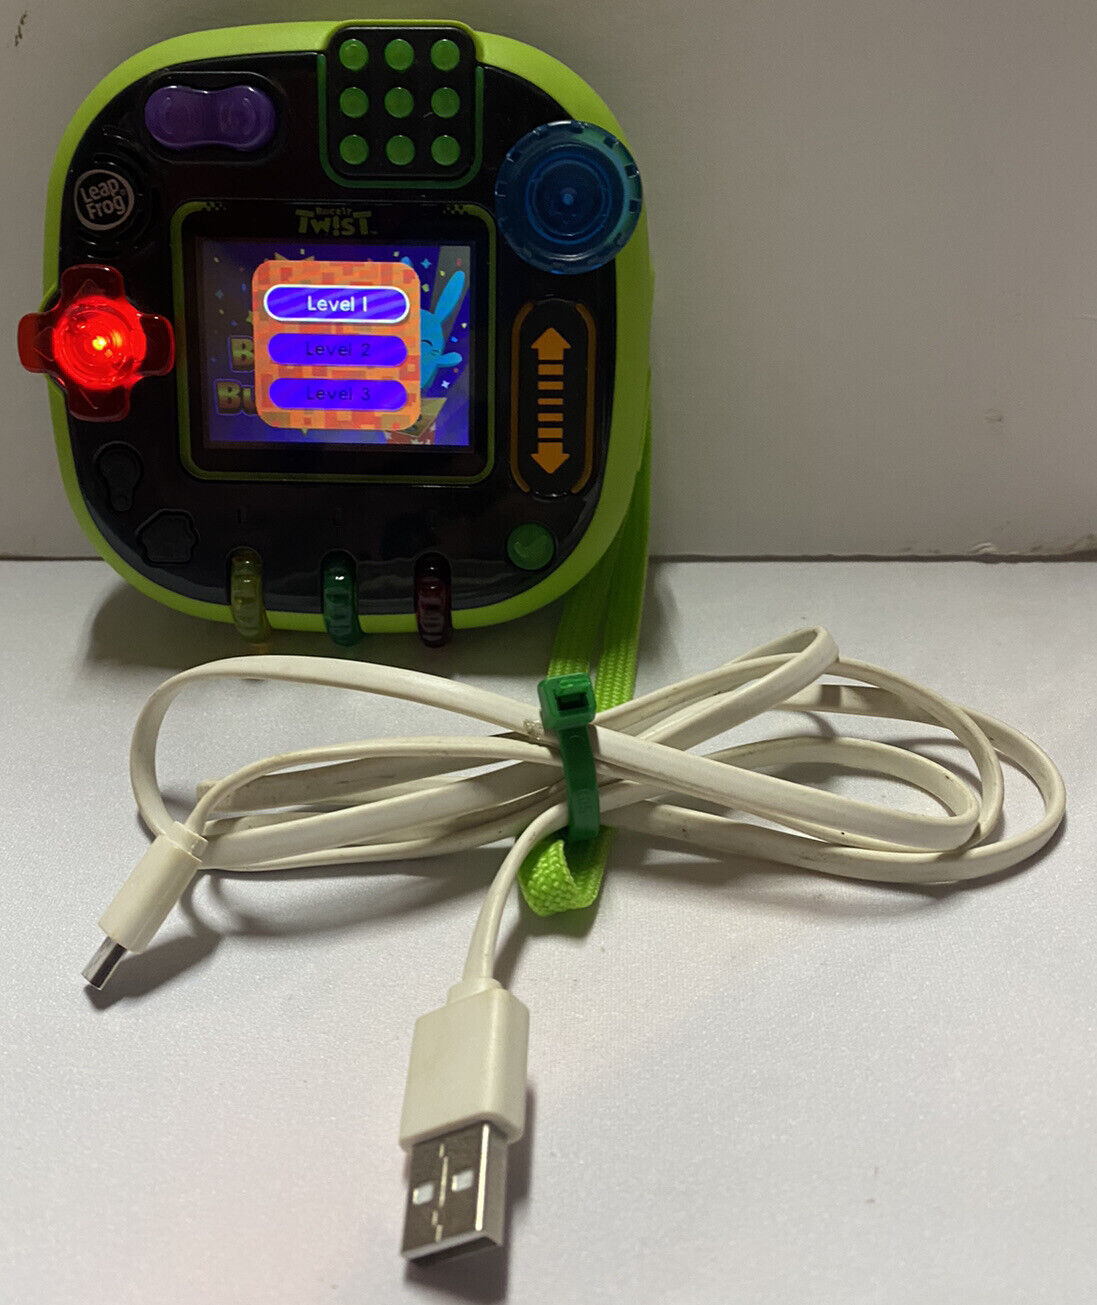 Leapfrog Rockit Twist Handheld Learnings Portable  Game System W/charger - Green